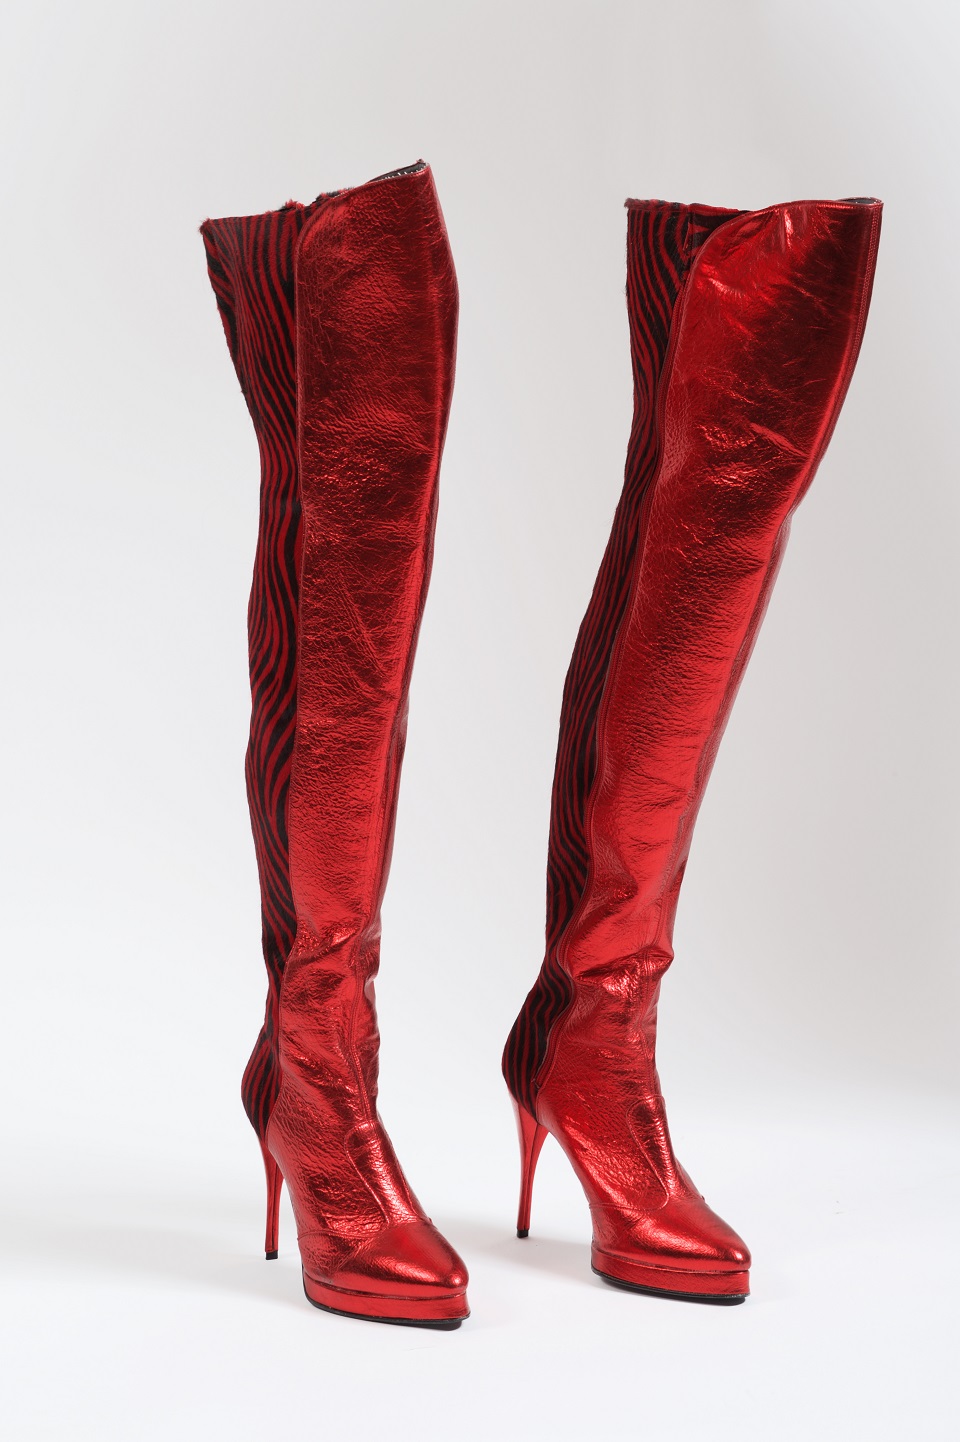 Ypu are hoveing over an image linked to Kinky boots